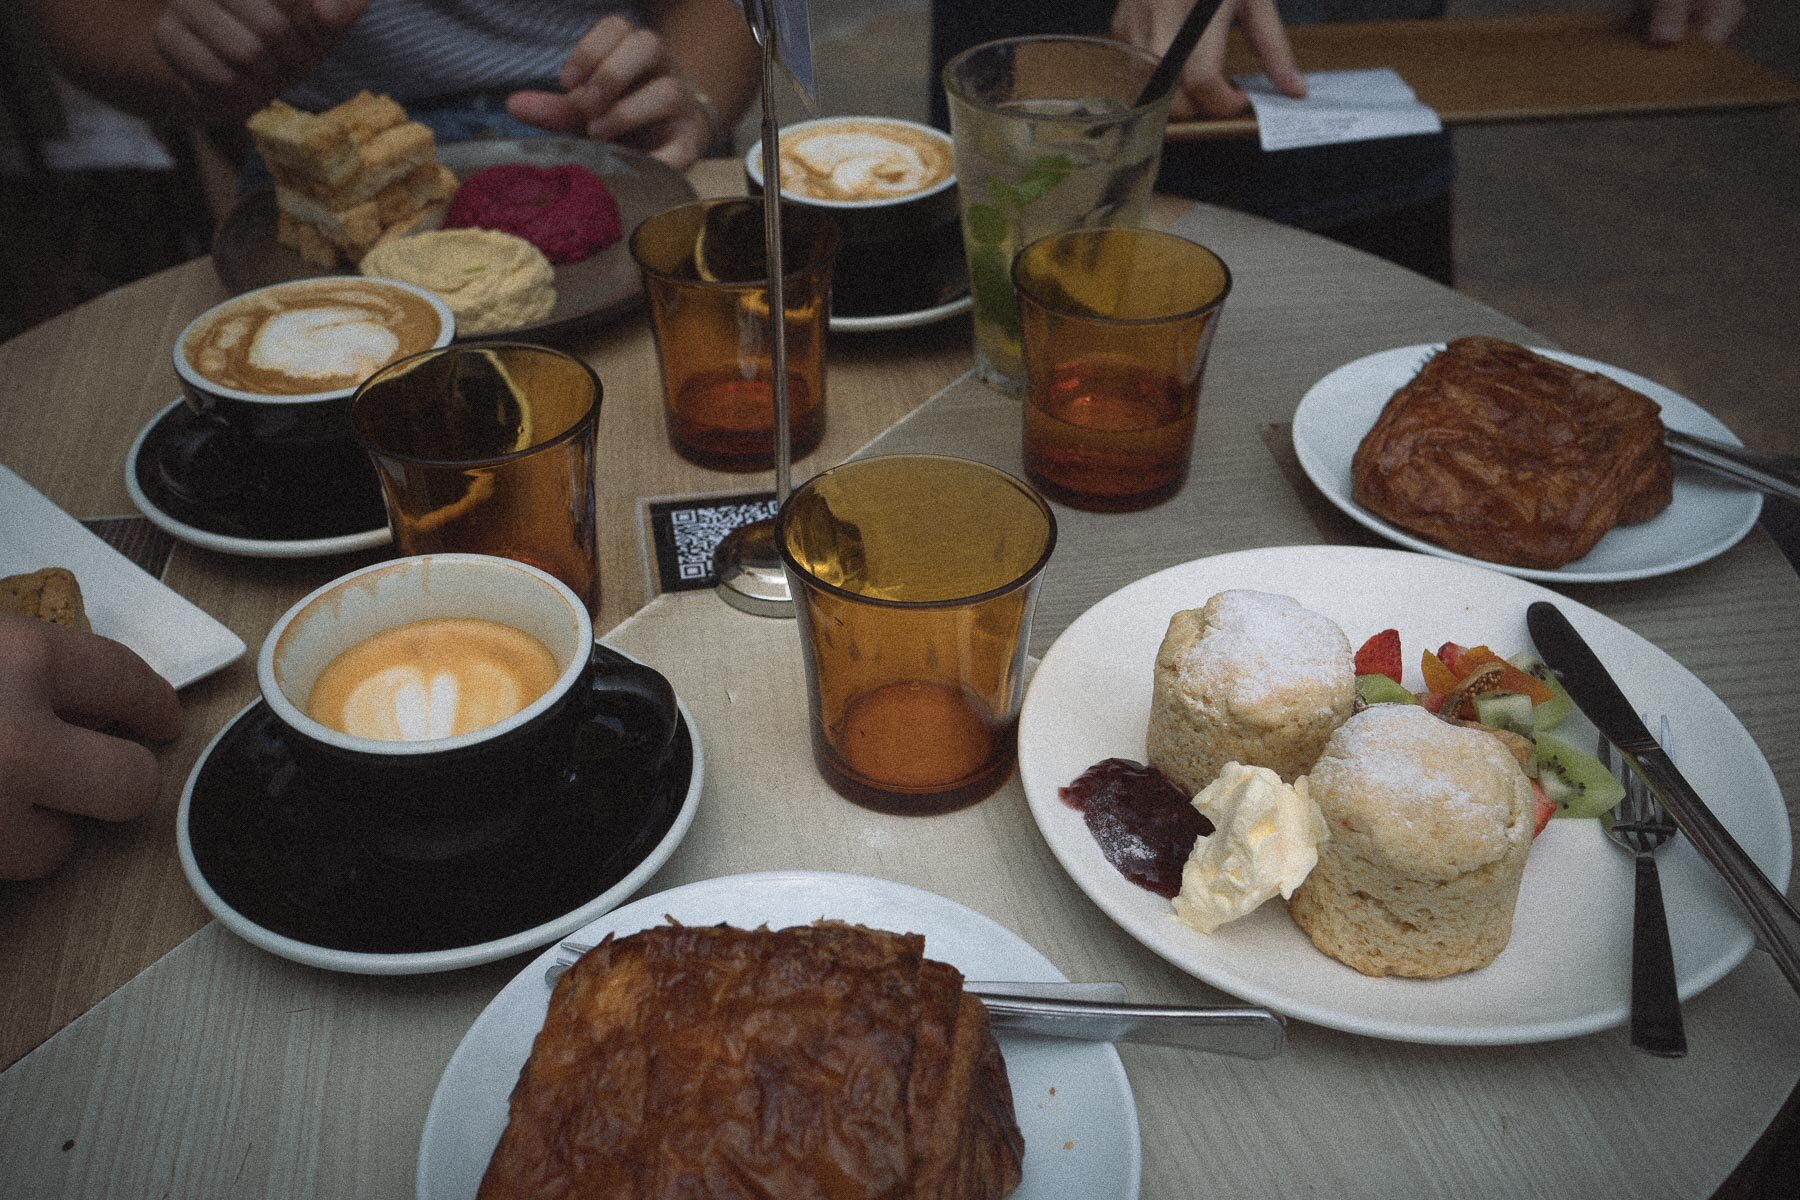 Nothing beats a breakfast date with friends at the weekend.